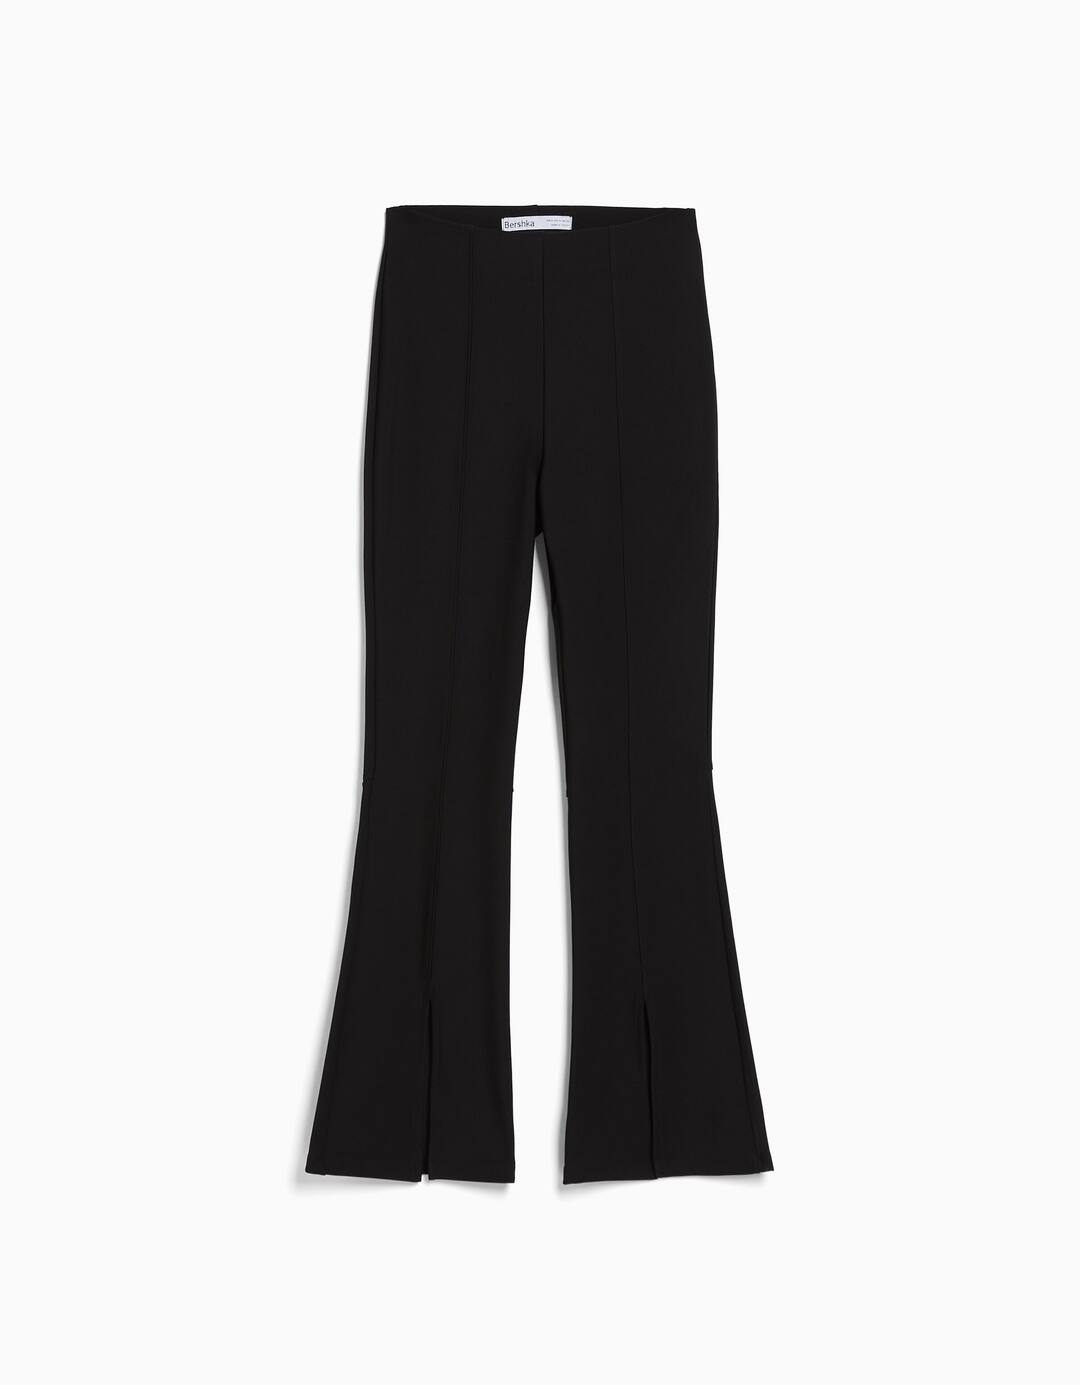 Kick flare trousers with vent